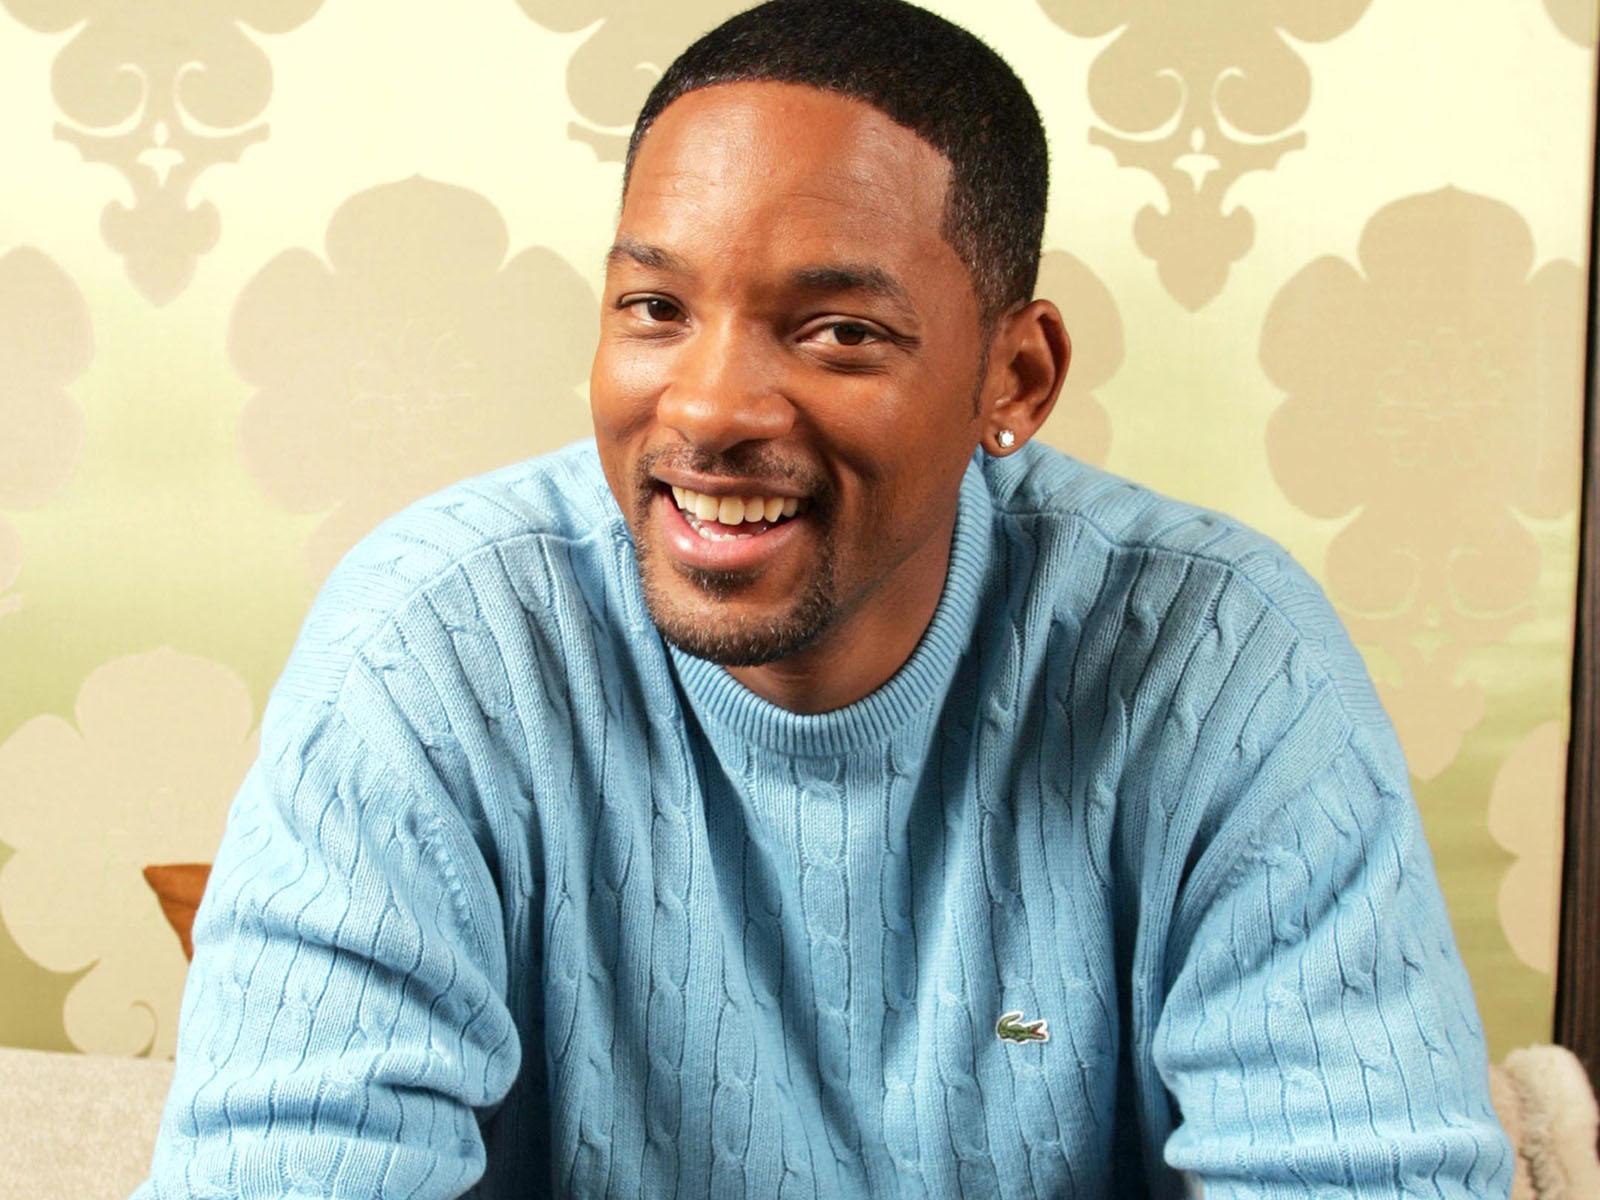 Will Smith Hollywood Actor High Resolution Desktop Wallpapers Daily. 49